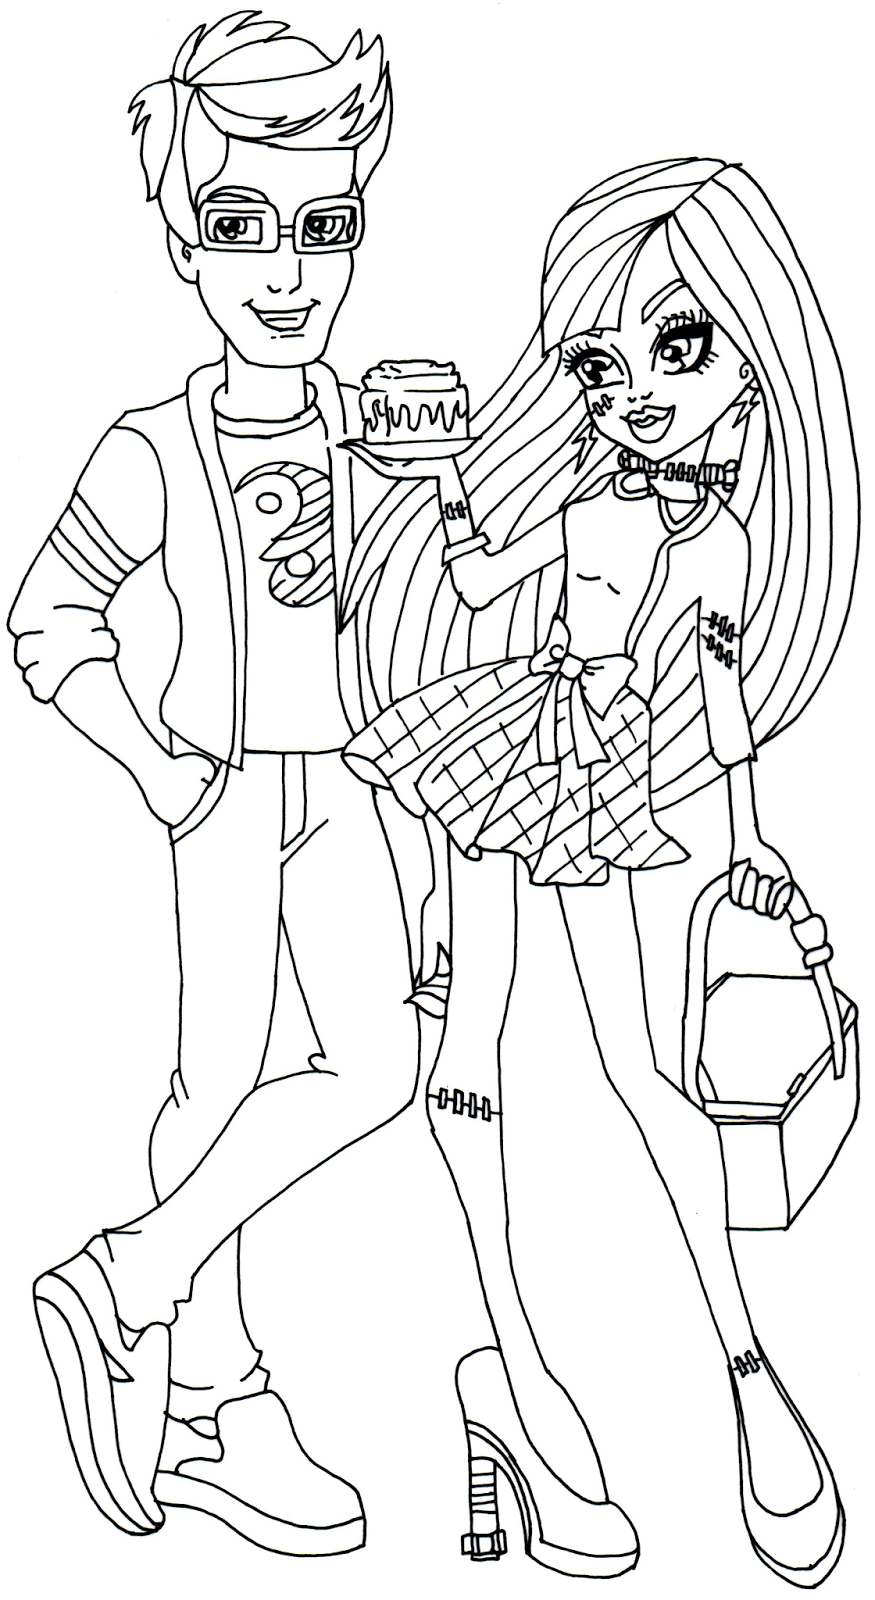  Monster High Coloring Pages | Coloring pages for Girls | Cool coloring page | #9